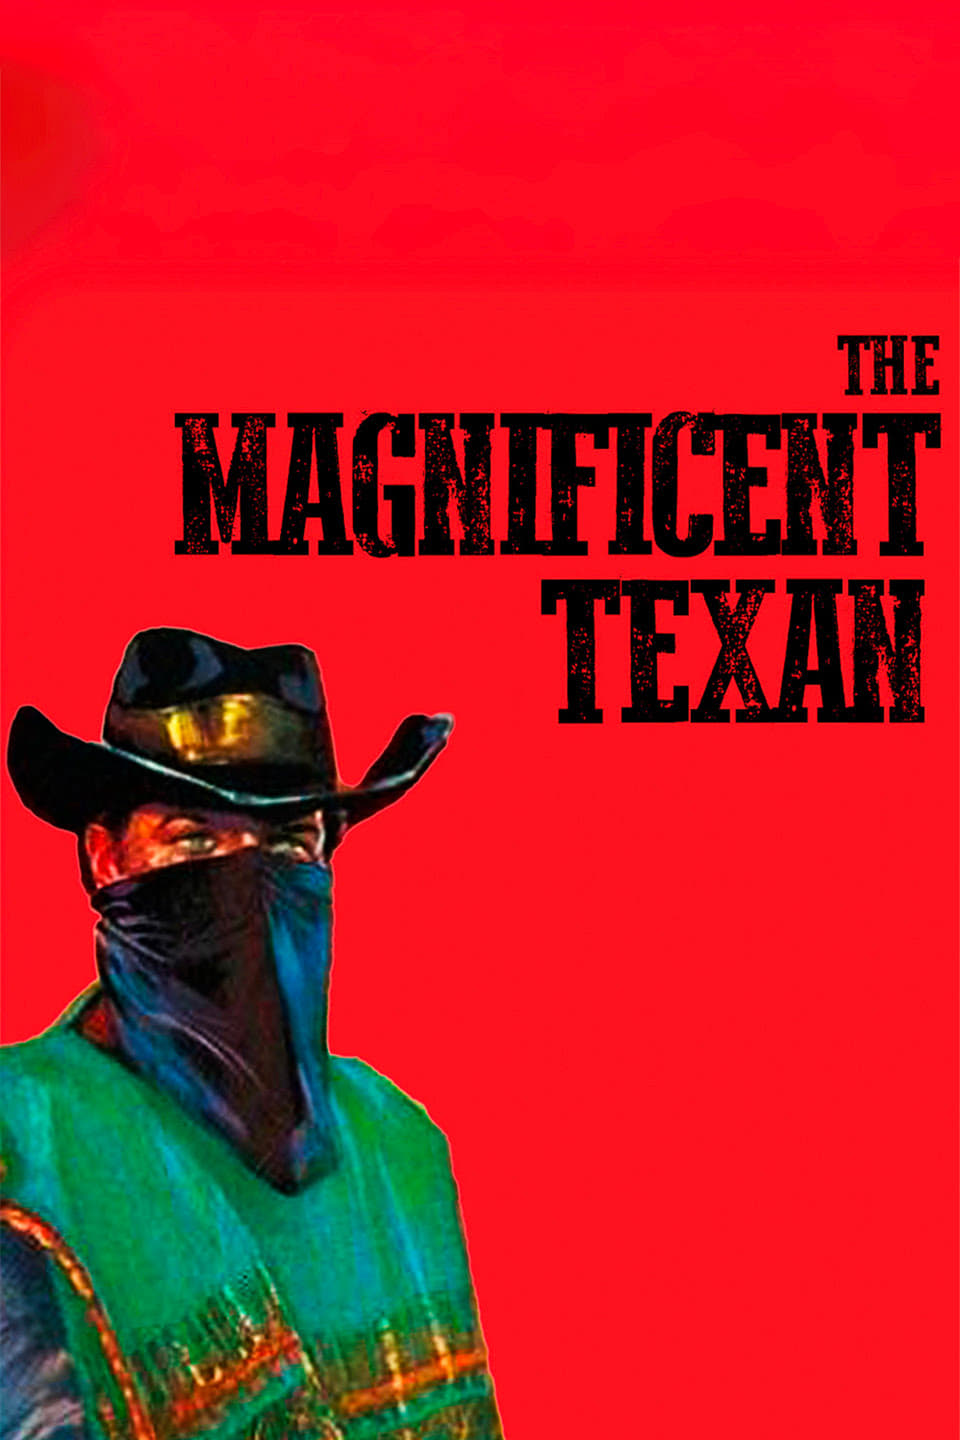 The Magnificent Texan (1967)